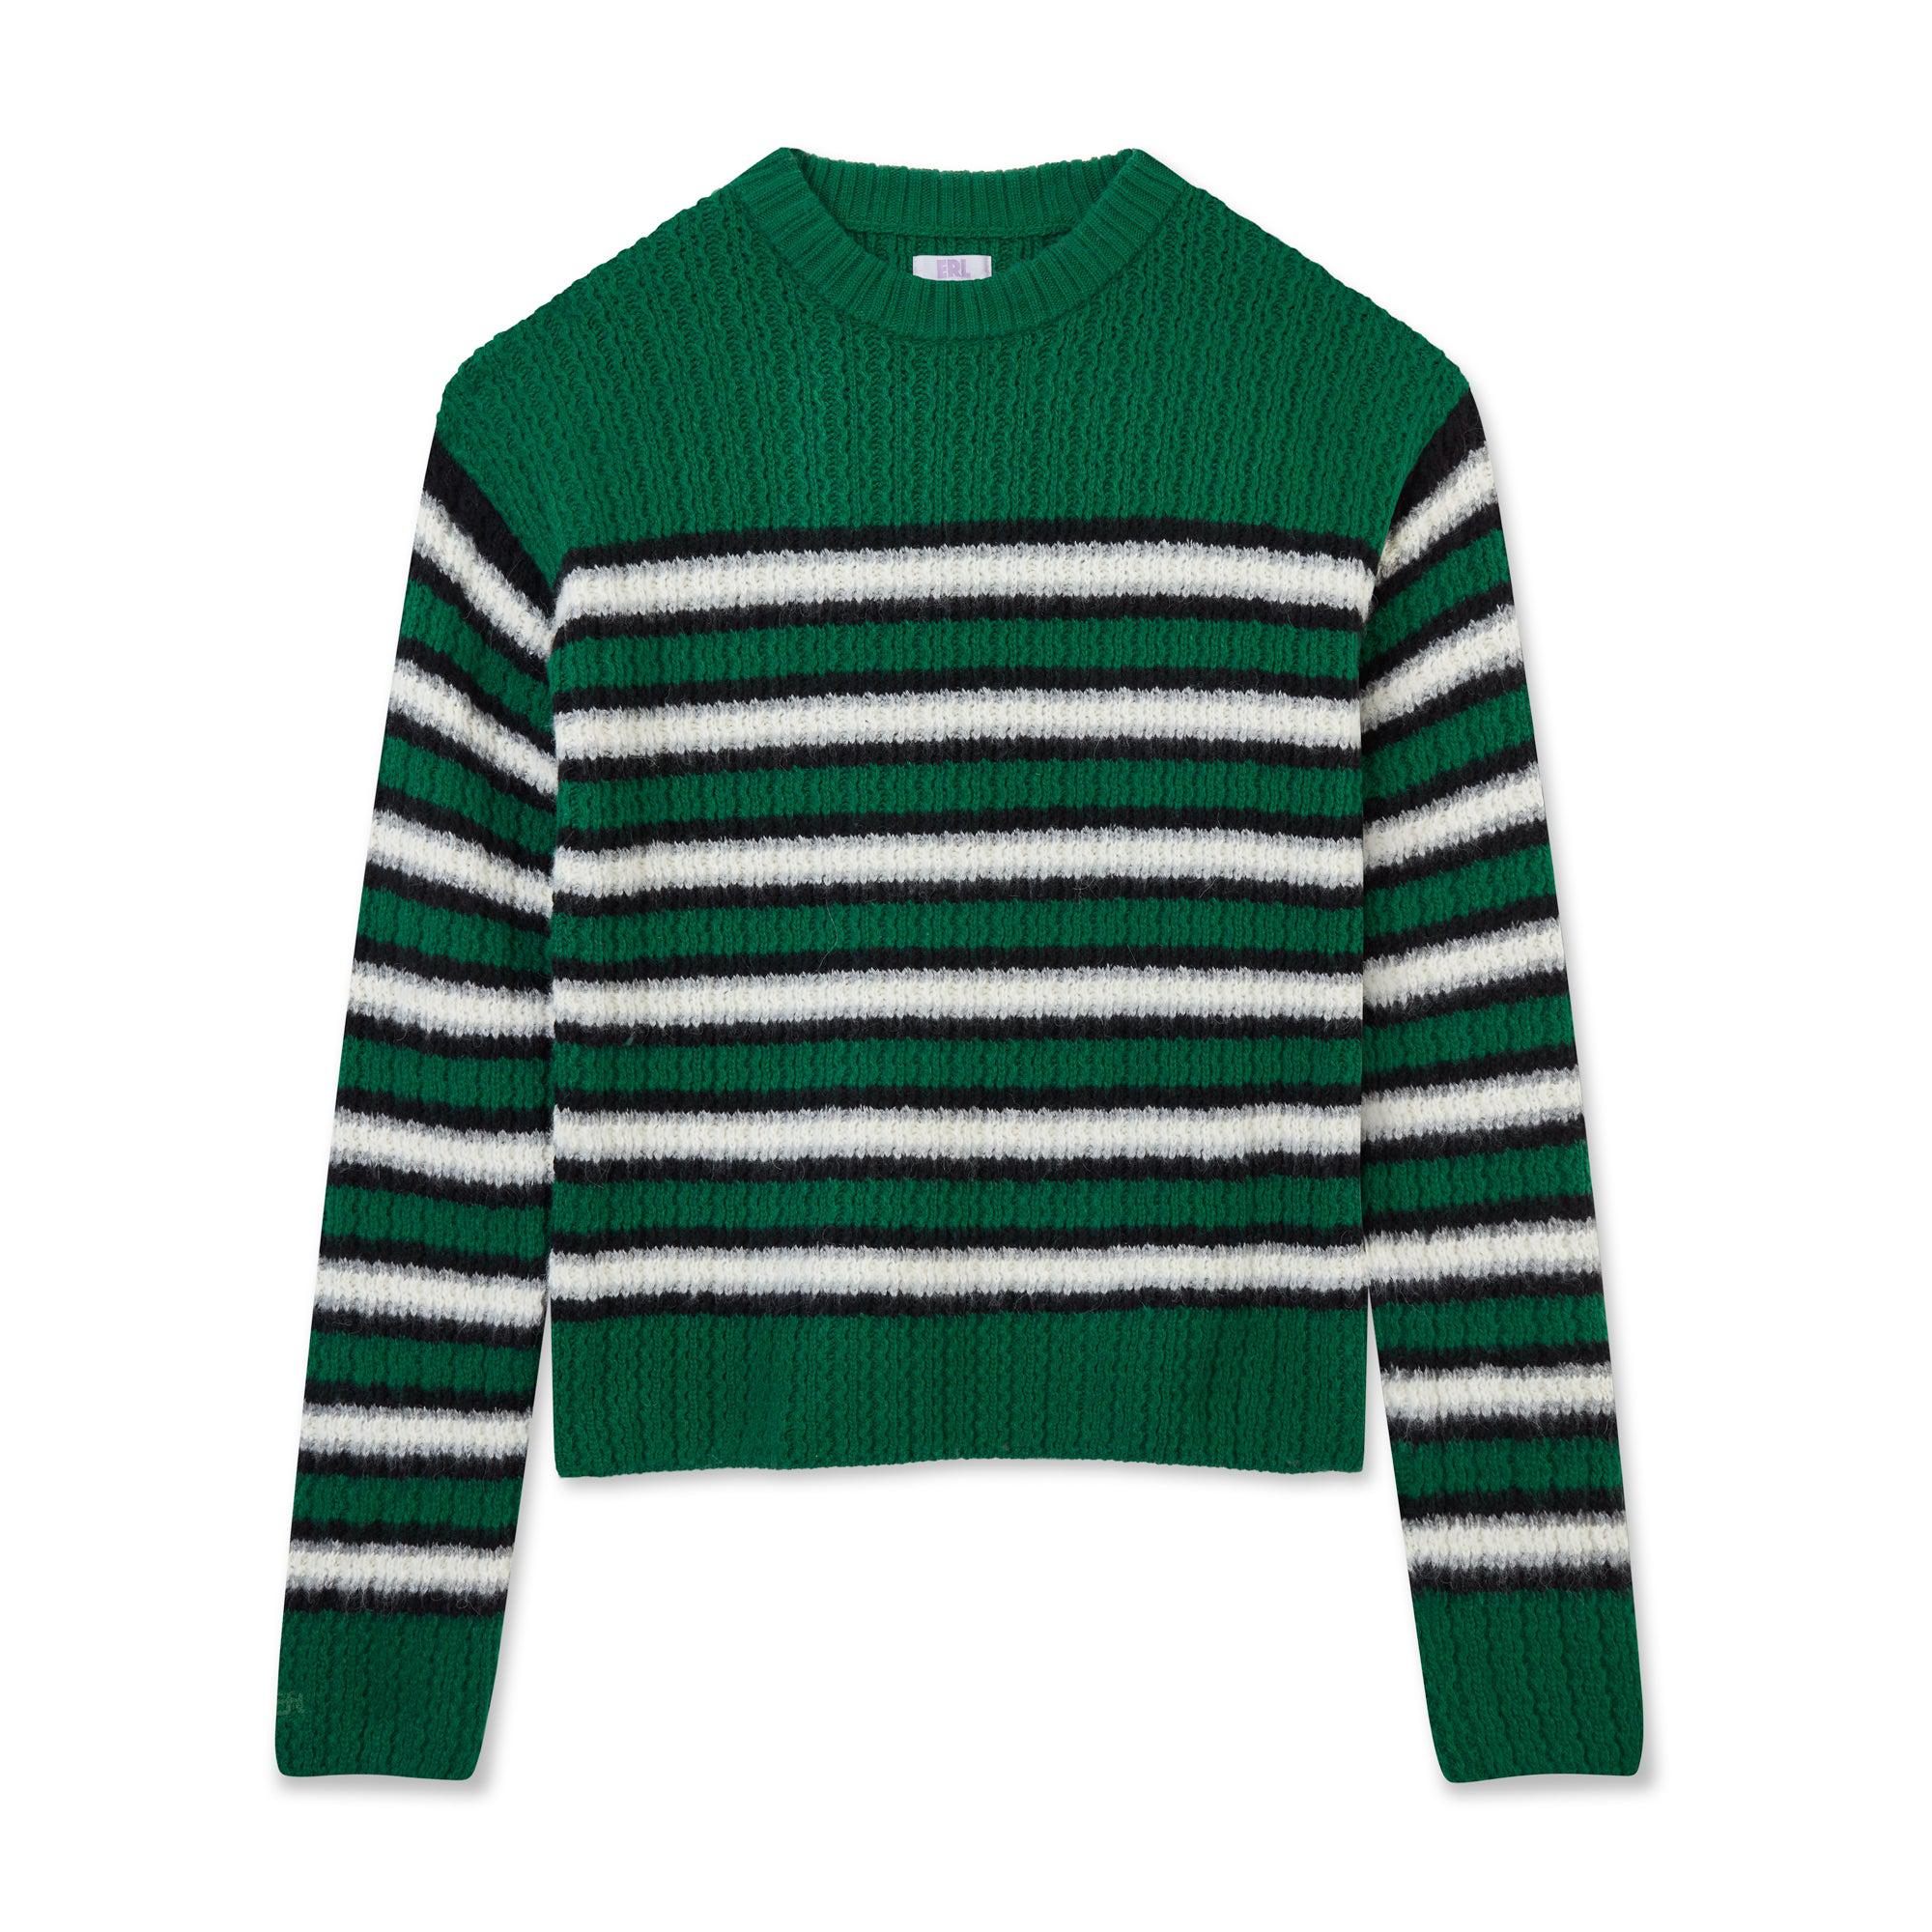 ERL Stripes Crew Neck Sweater (Green) by ERL